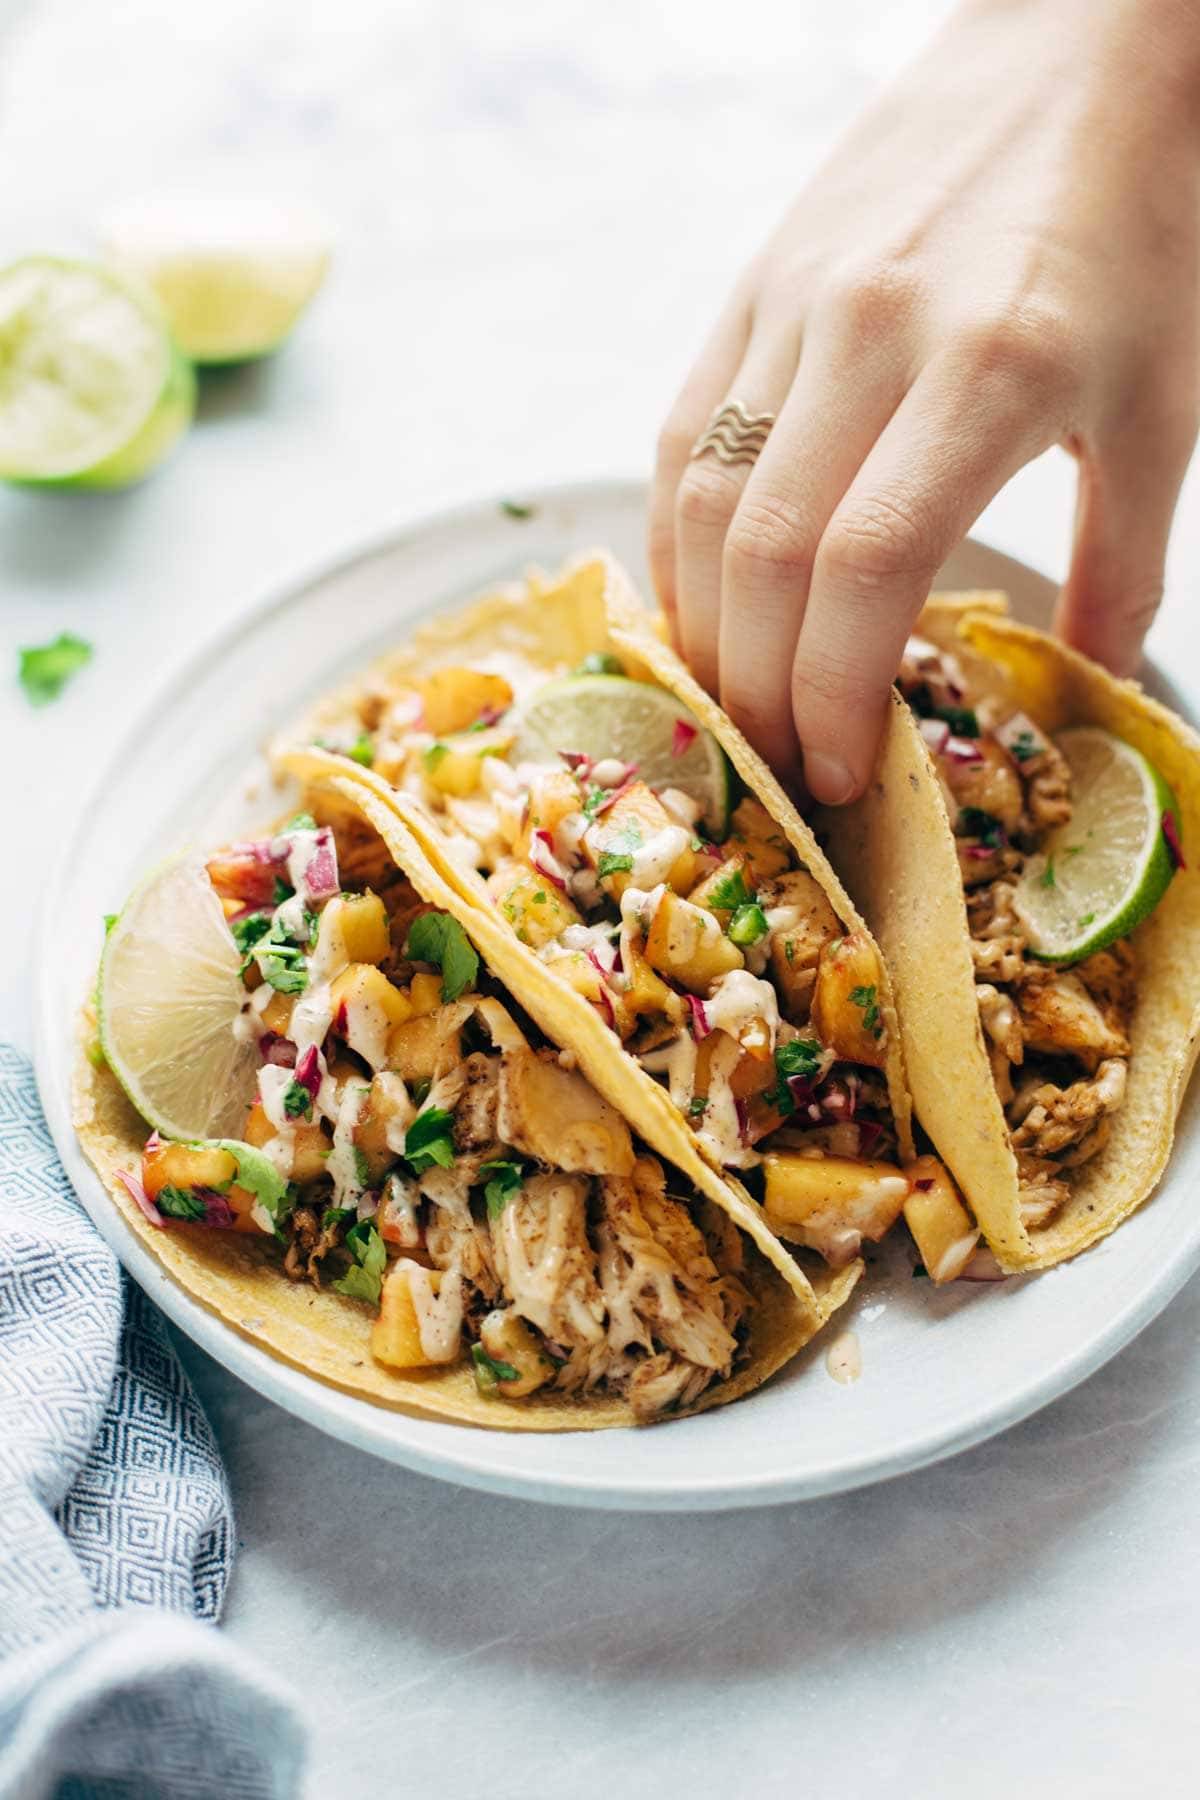 Chili Lime Fish Tacos - mind-blowingly delicious and easy. 5 basic ingredients for the fish, and a quick peach salsa to add some color and flavor.